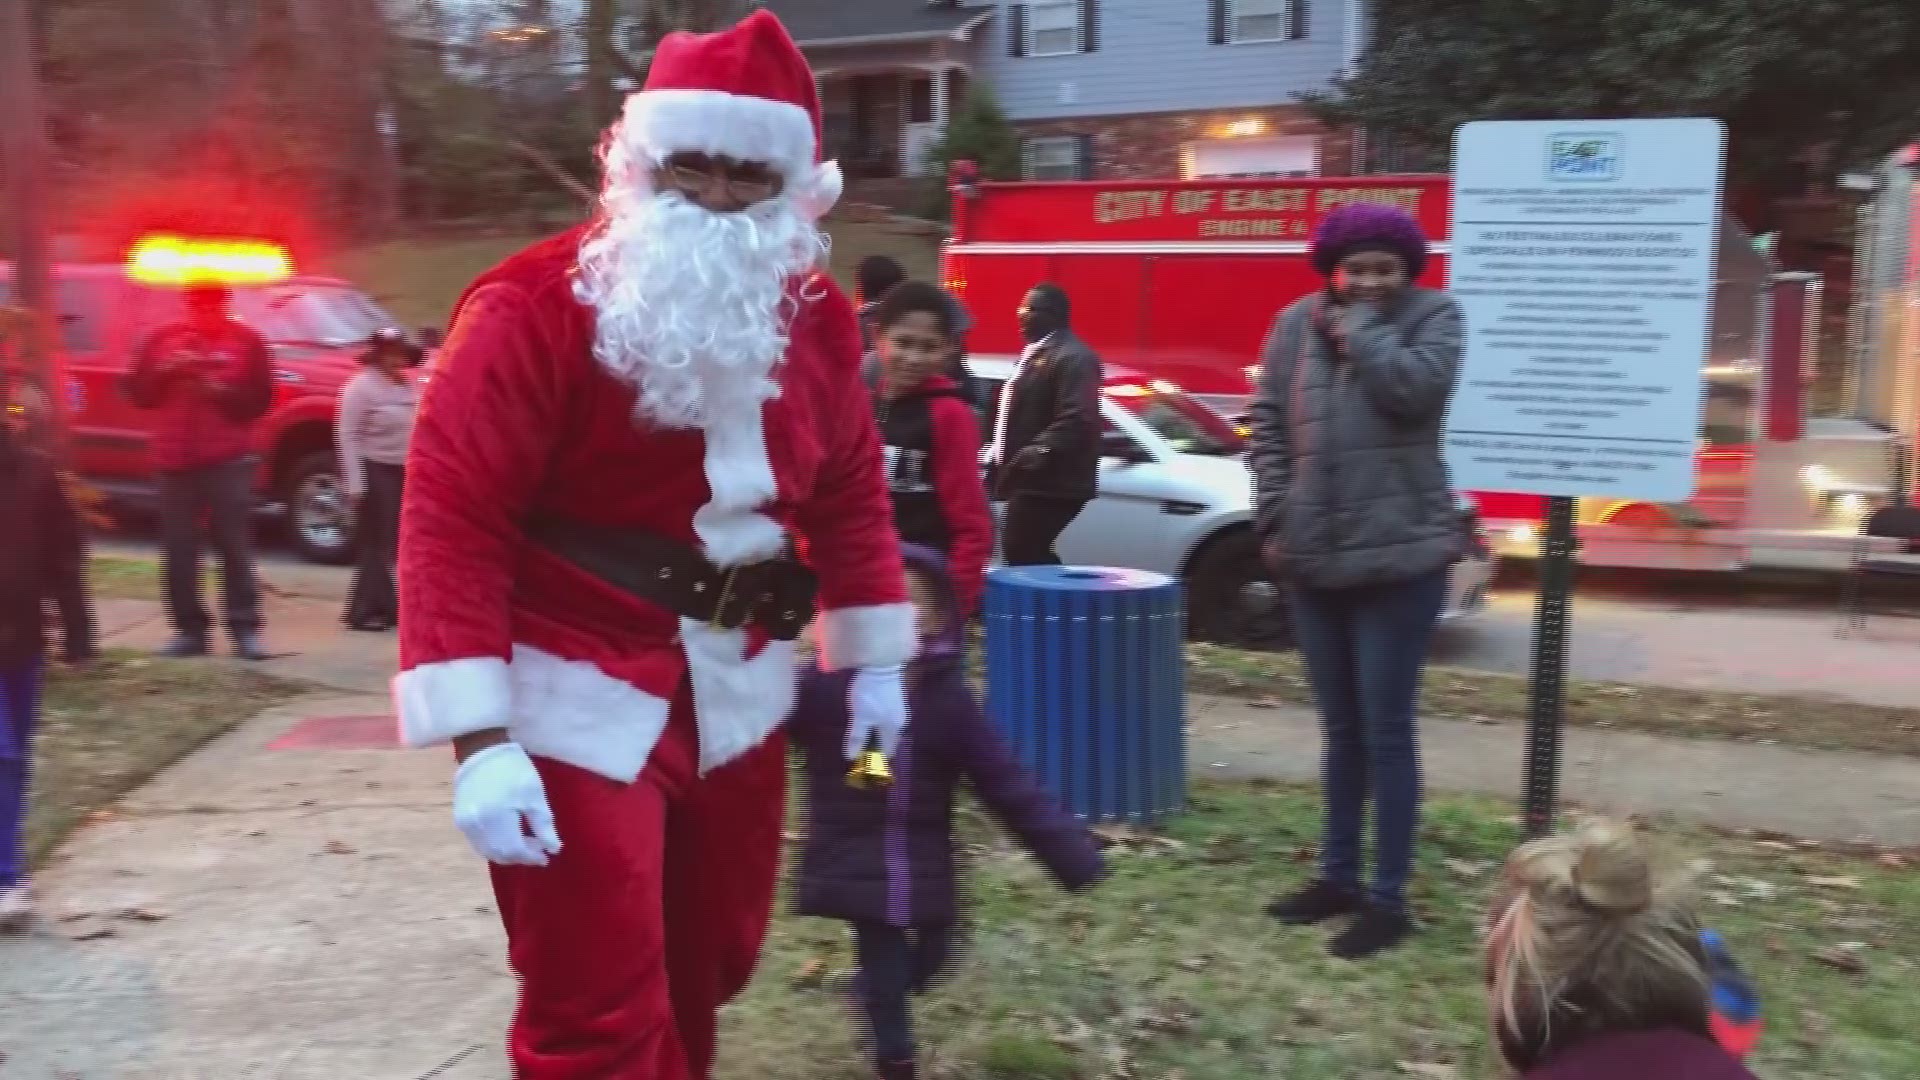 Santa Rides again thanks to East Point Fire Department